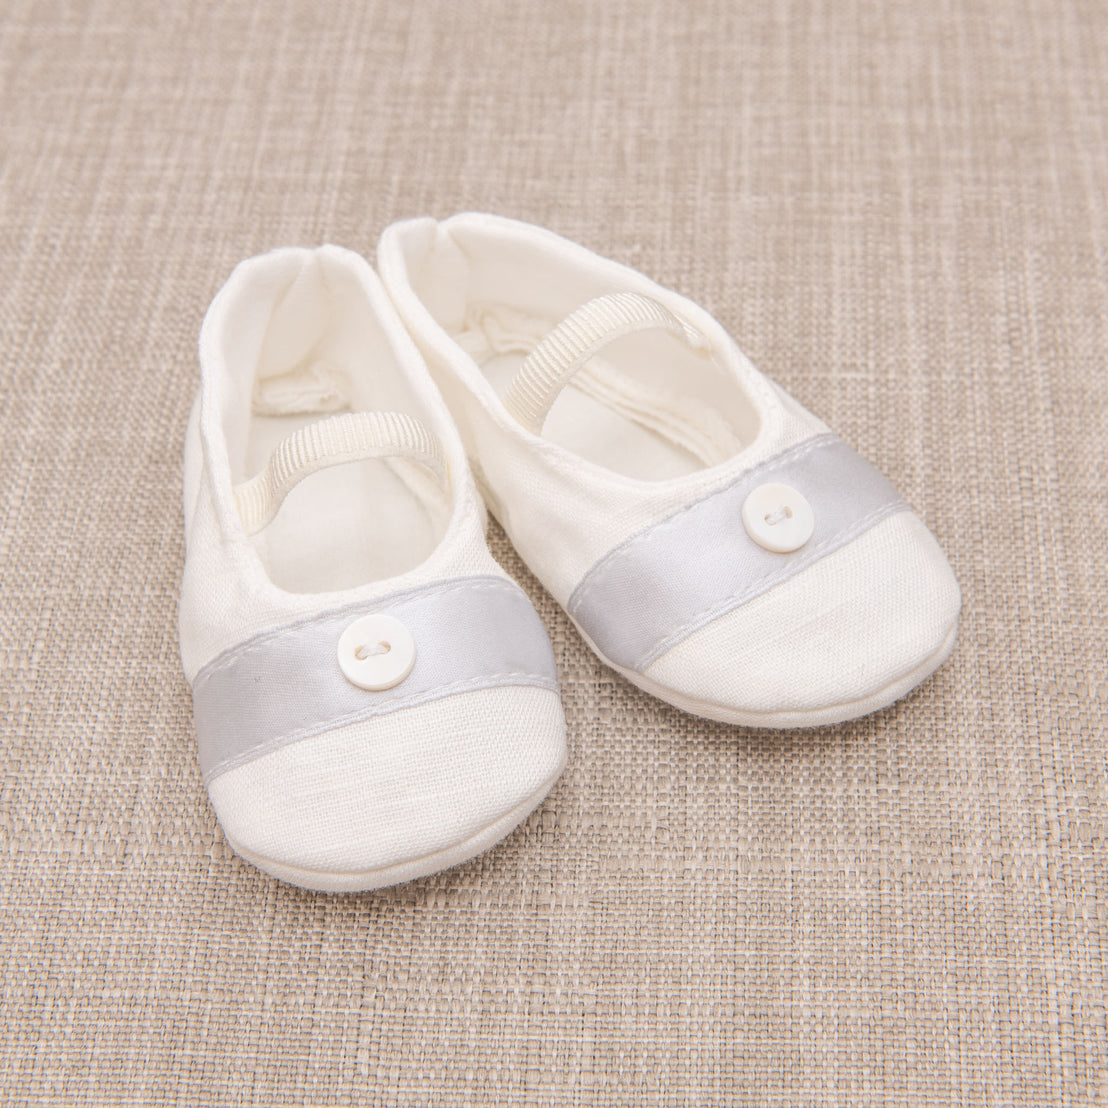 A pair of baptism shoes, lined in a blue silk.